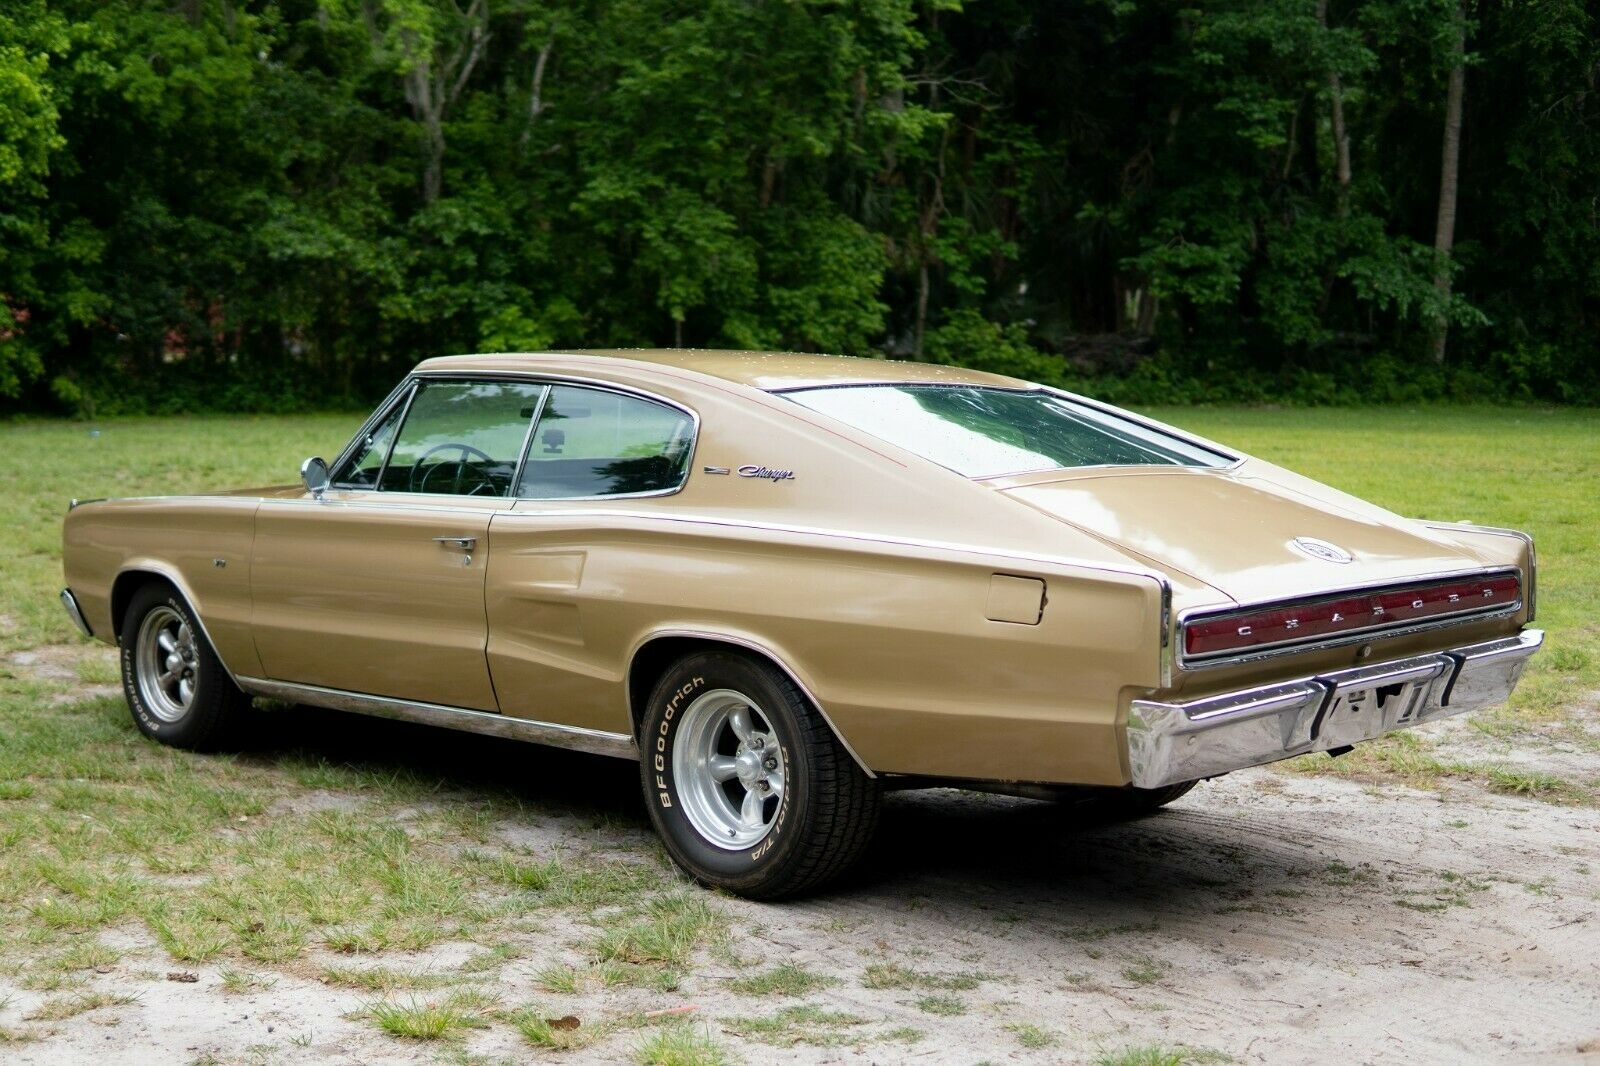 1967 Dodge Charger Is a Gold on Gold Gem, Needs a New Home - autoevolution